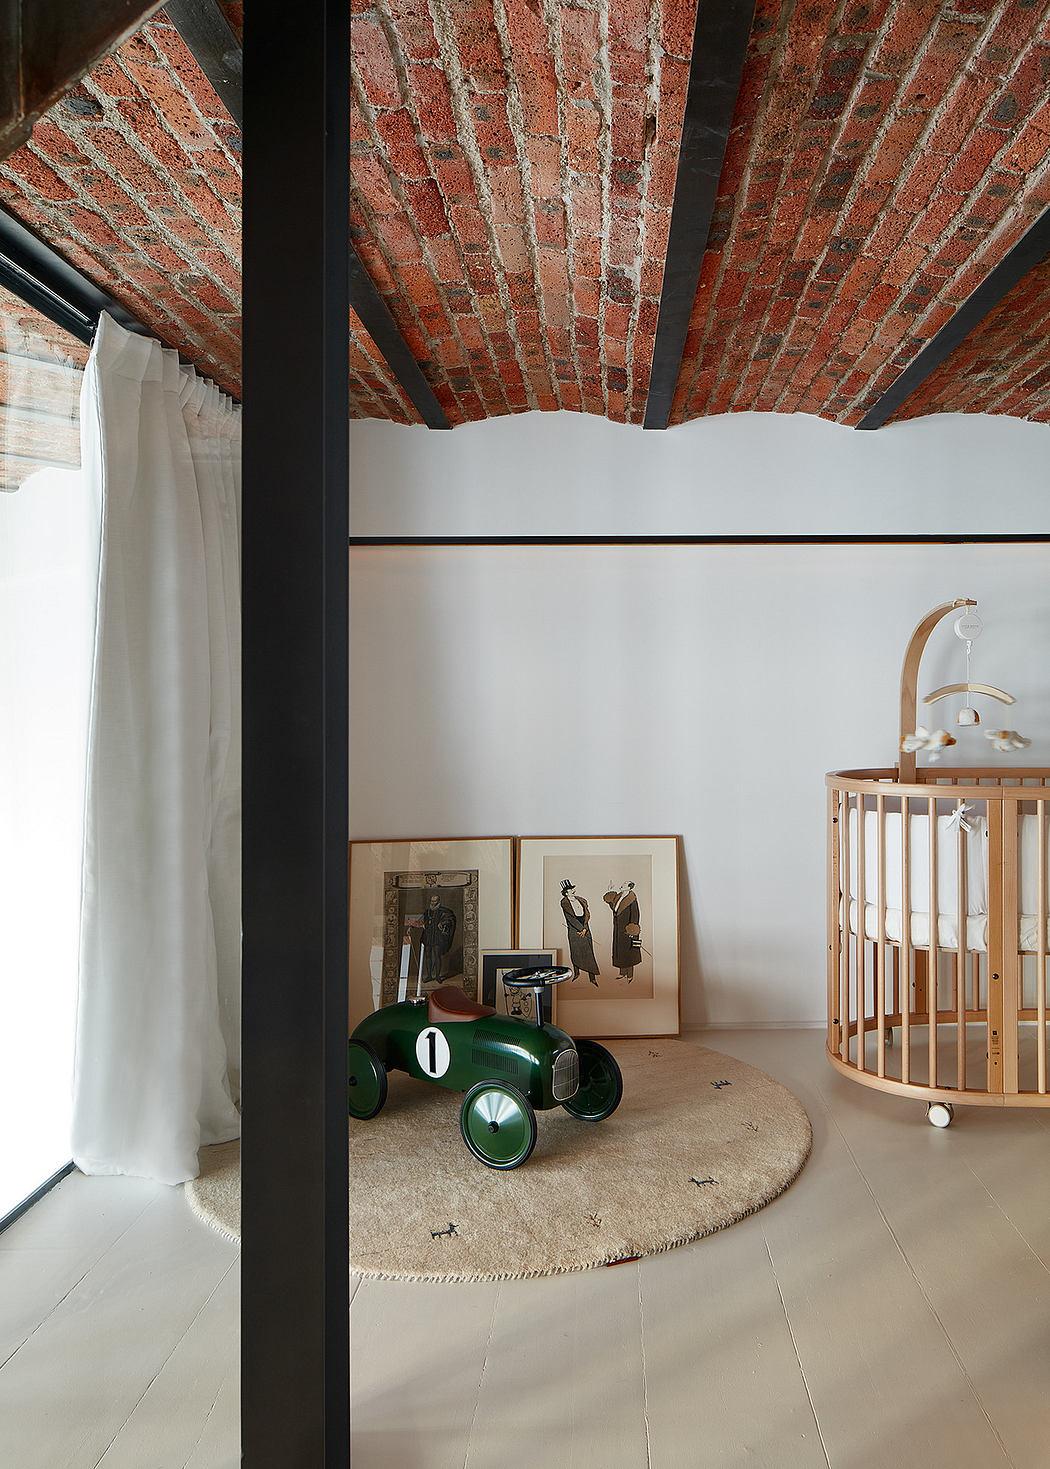 Modern room with exposed brick ceiling, vintage toys, and minimalistic decor.